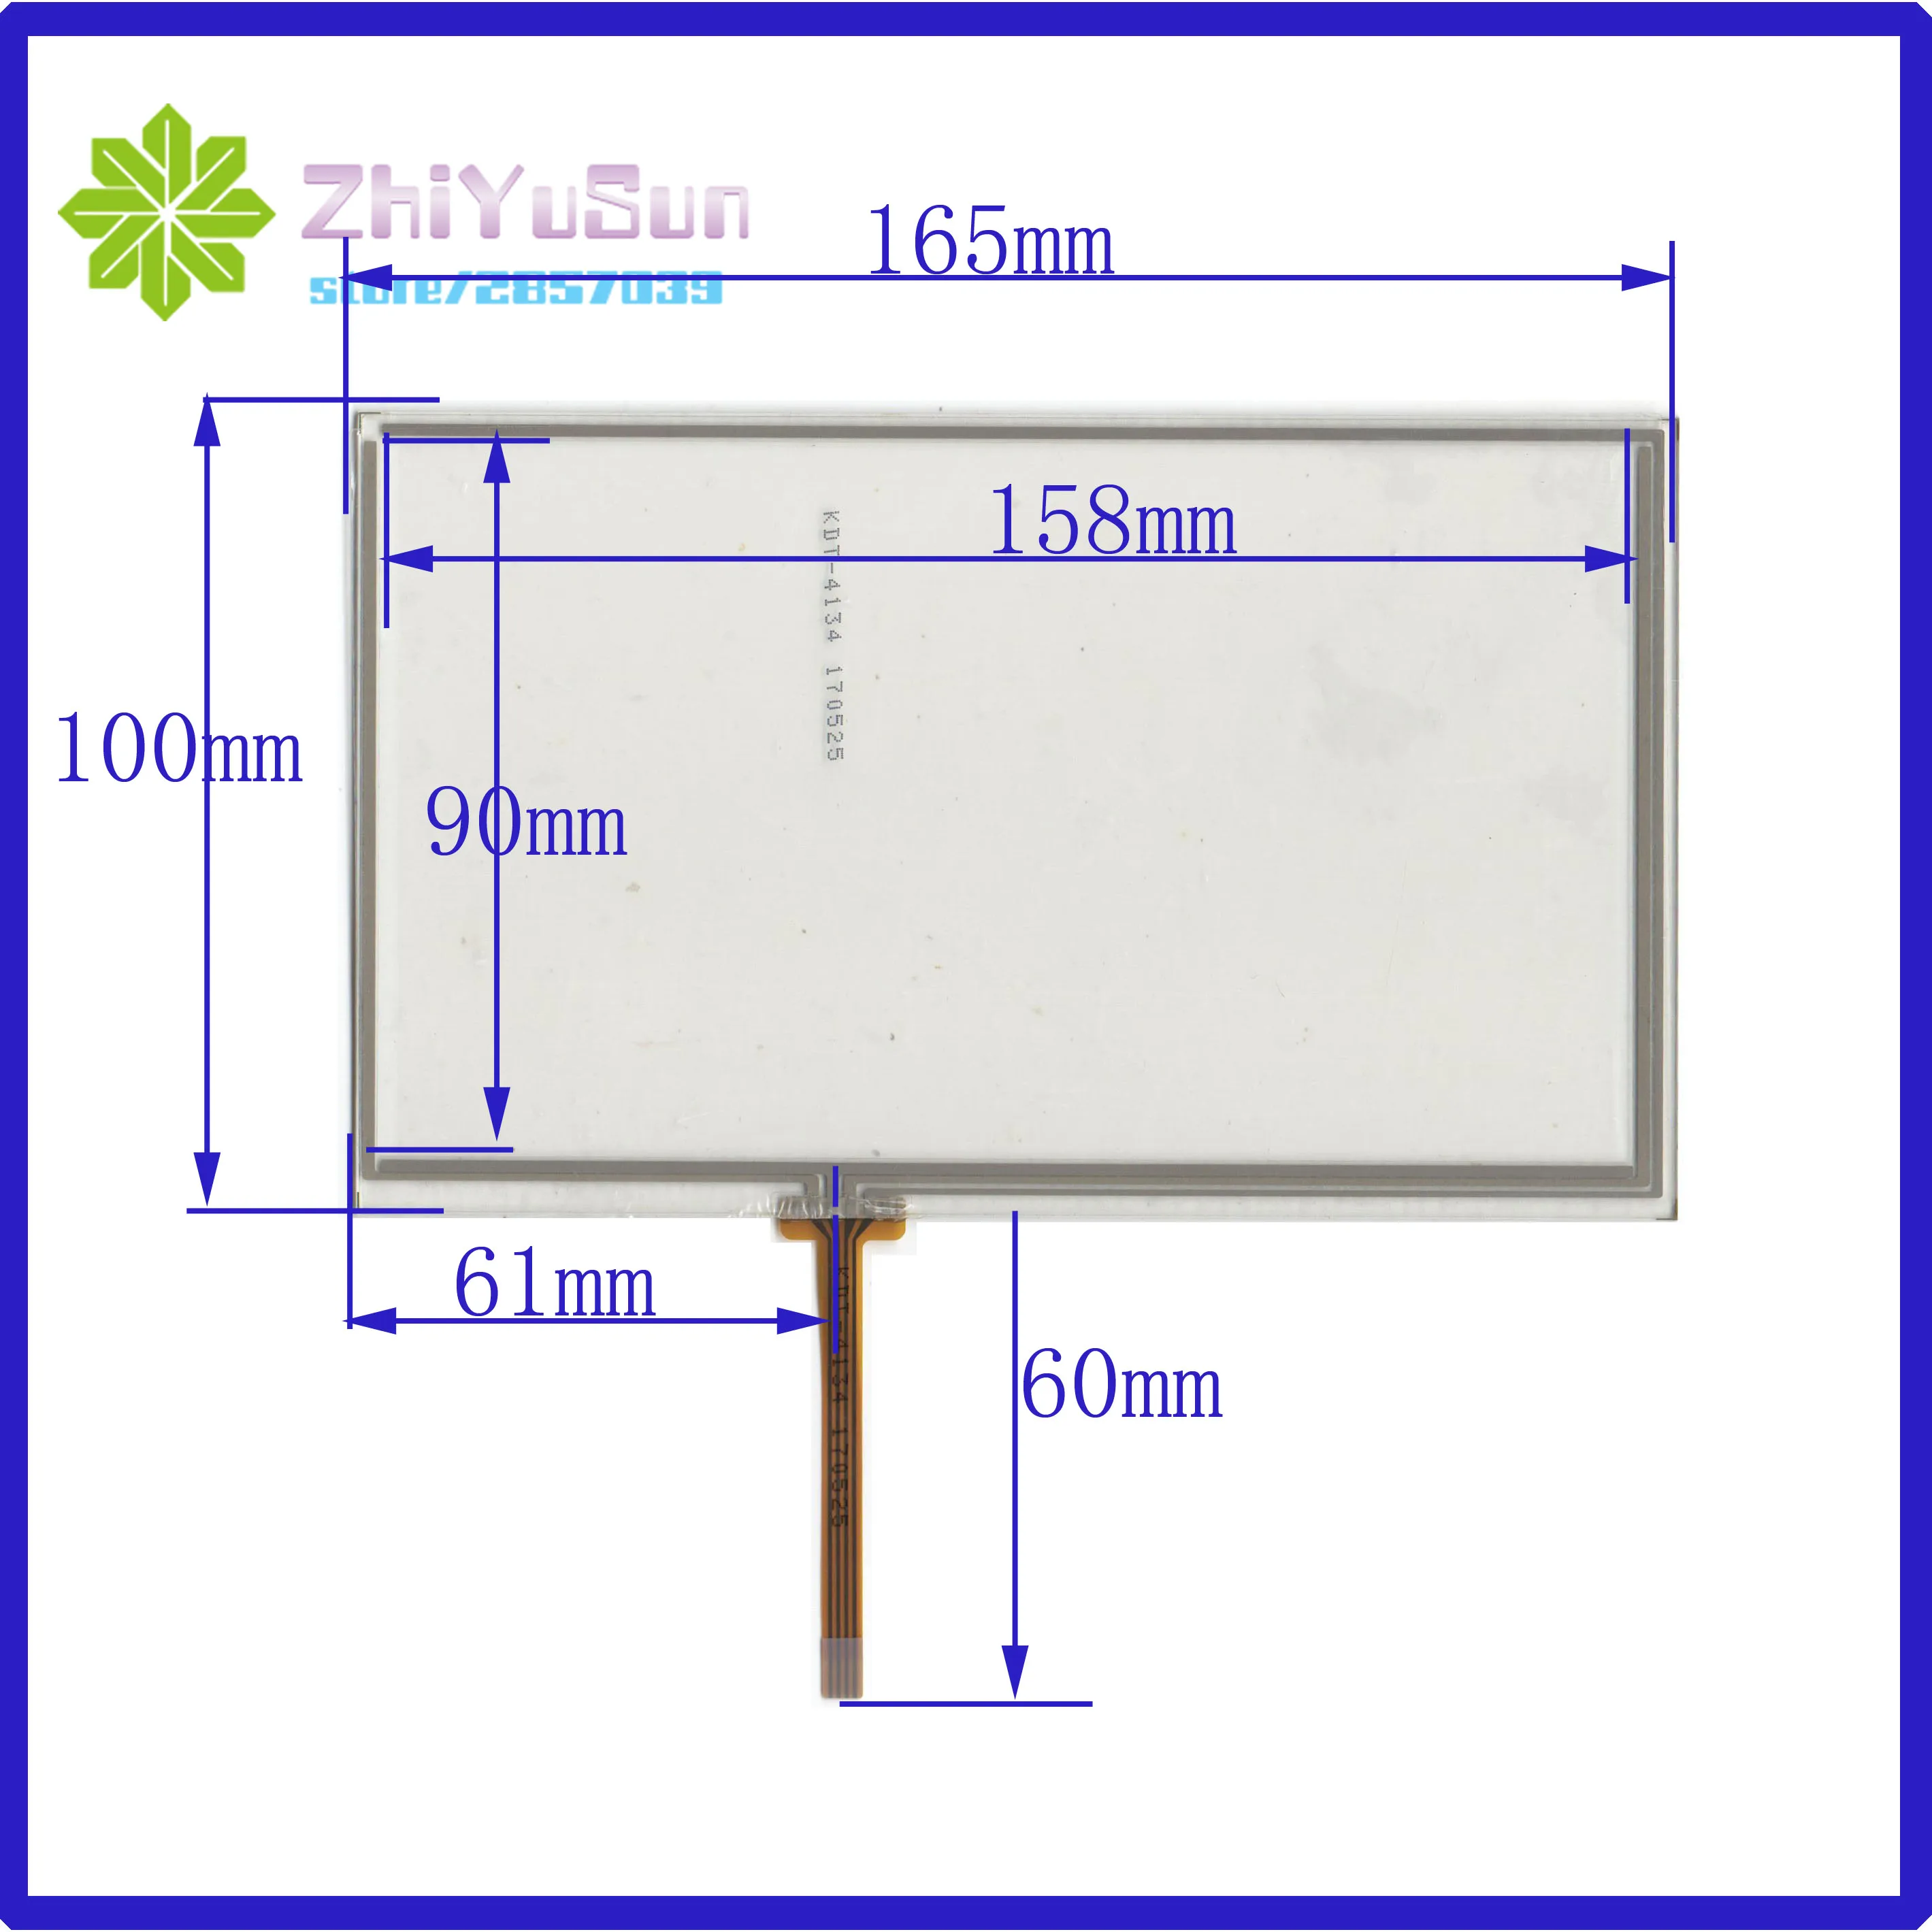 

ZhiYuSun wholesale KDT-4134 7inch 4lines resistance screen for car DVD redio this is compatible KDT4134